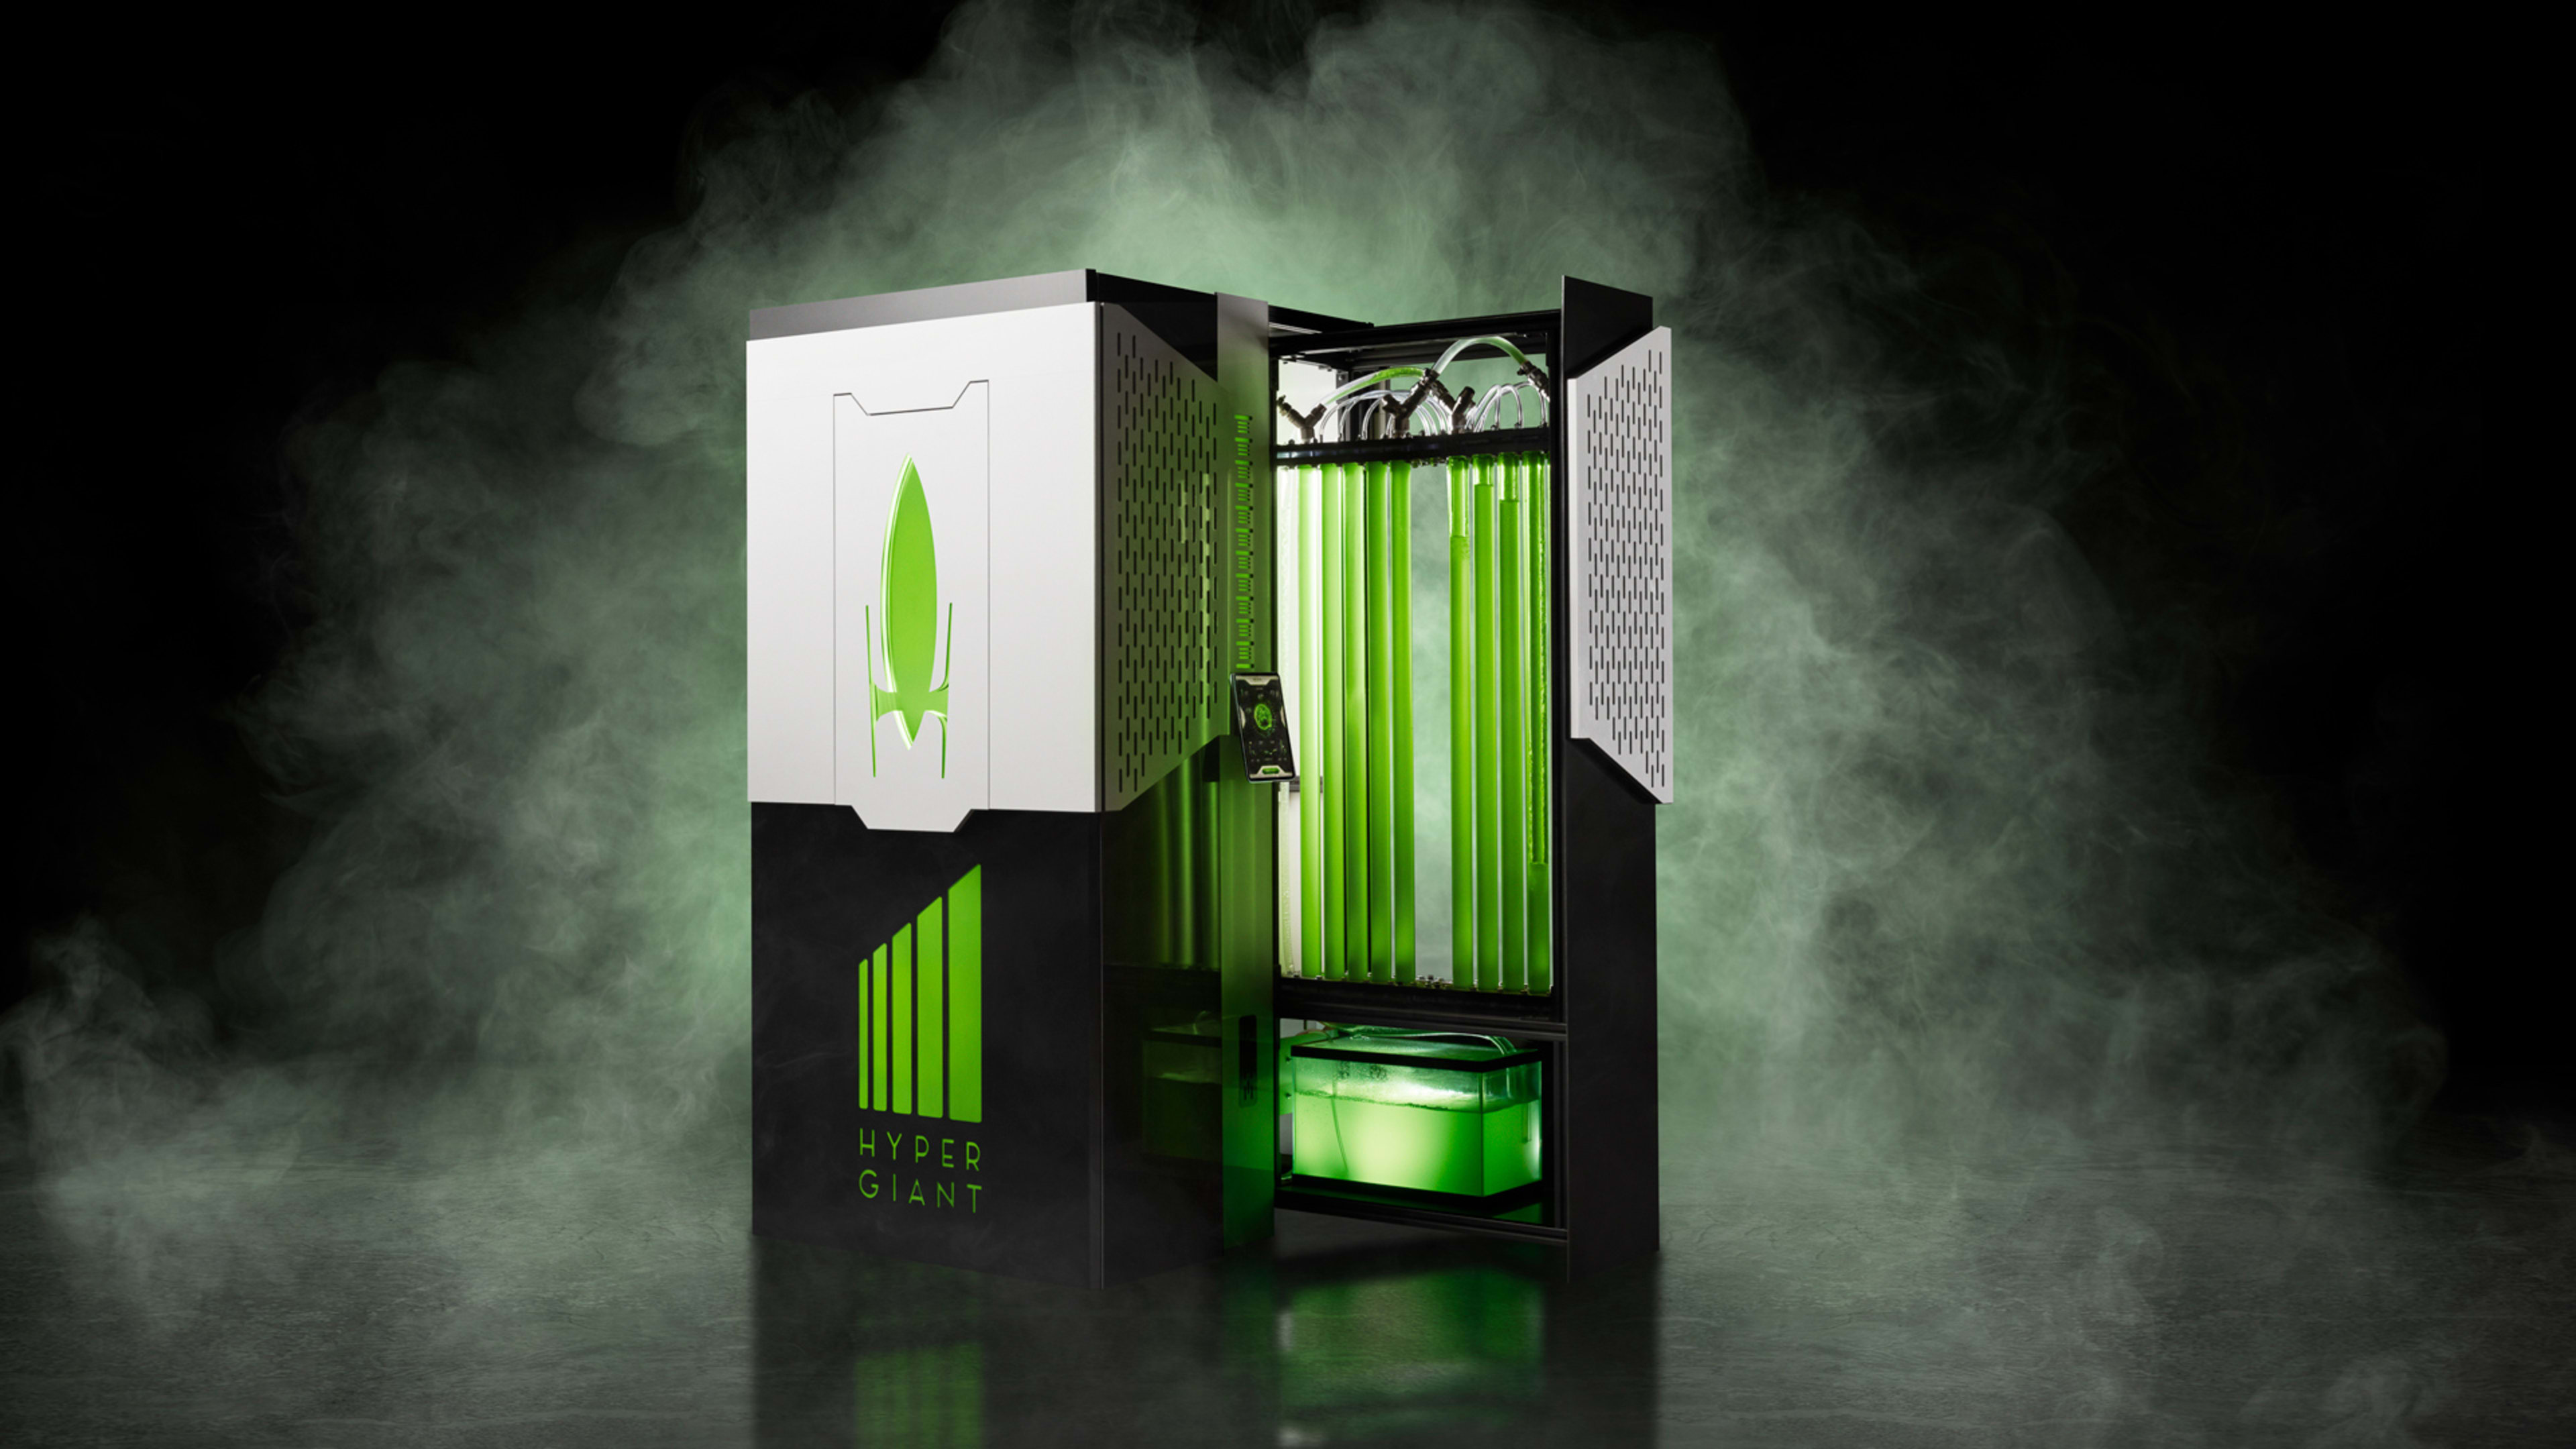 This ‘personal carbon sequestration’ device uses algae to remove CO2 from the air